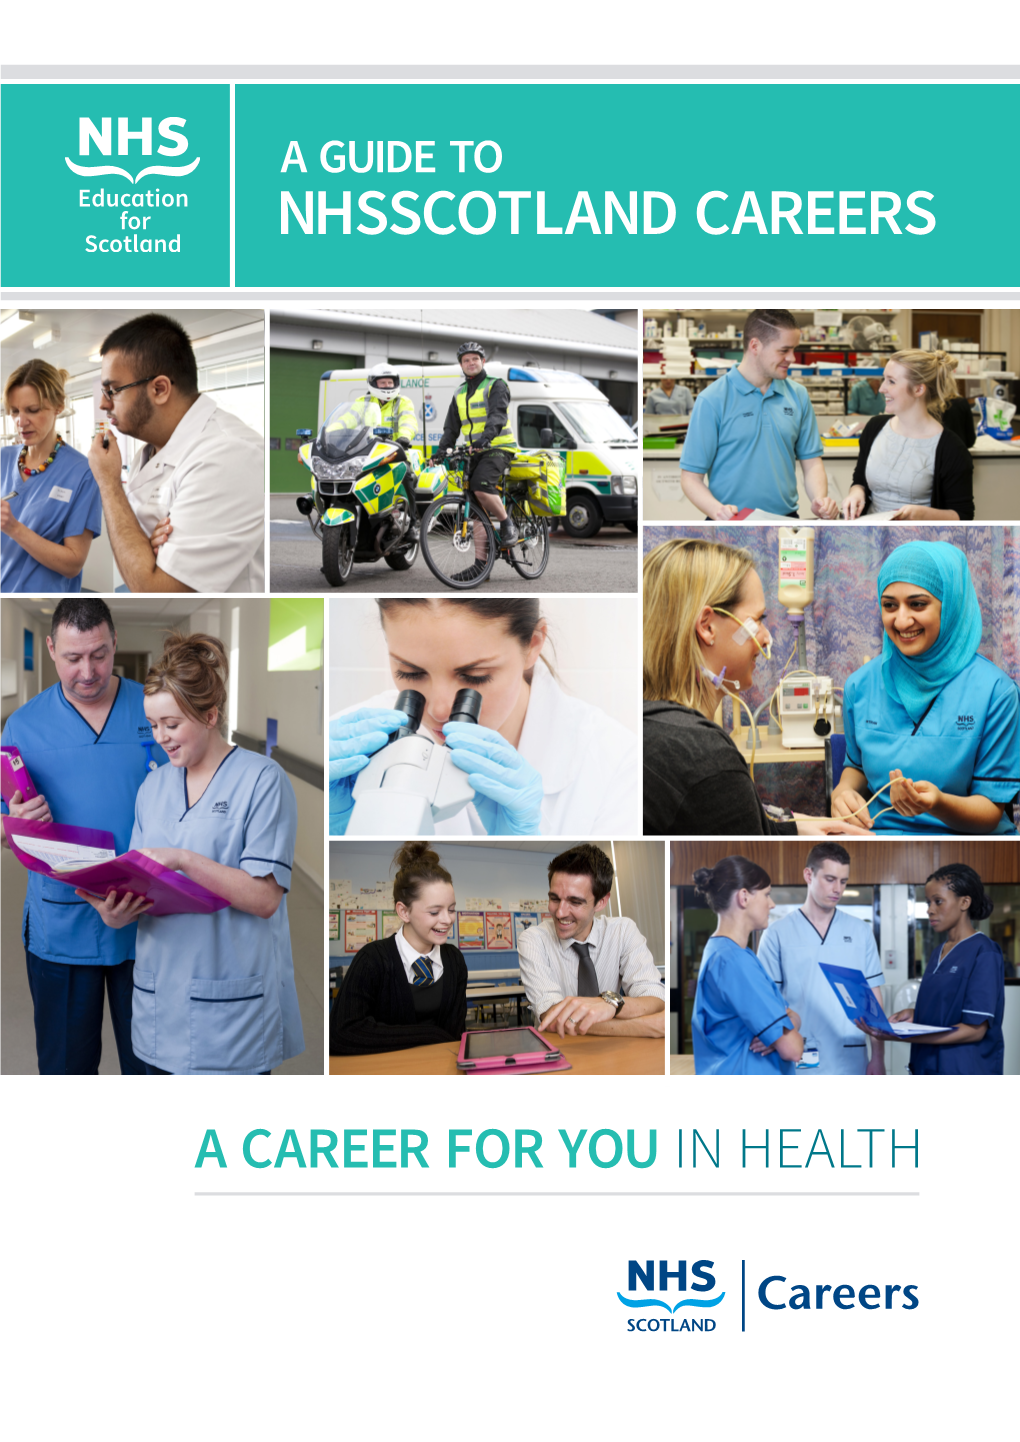 A Career for You in Health a Career for You in Health